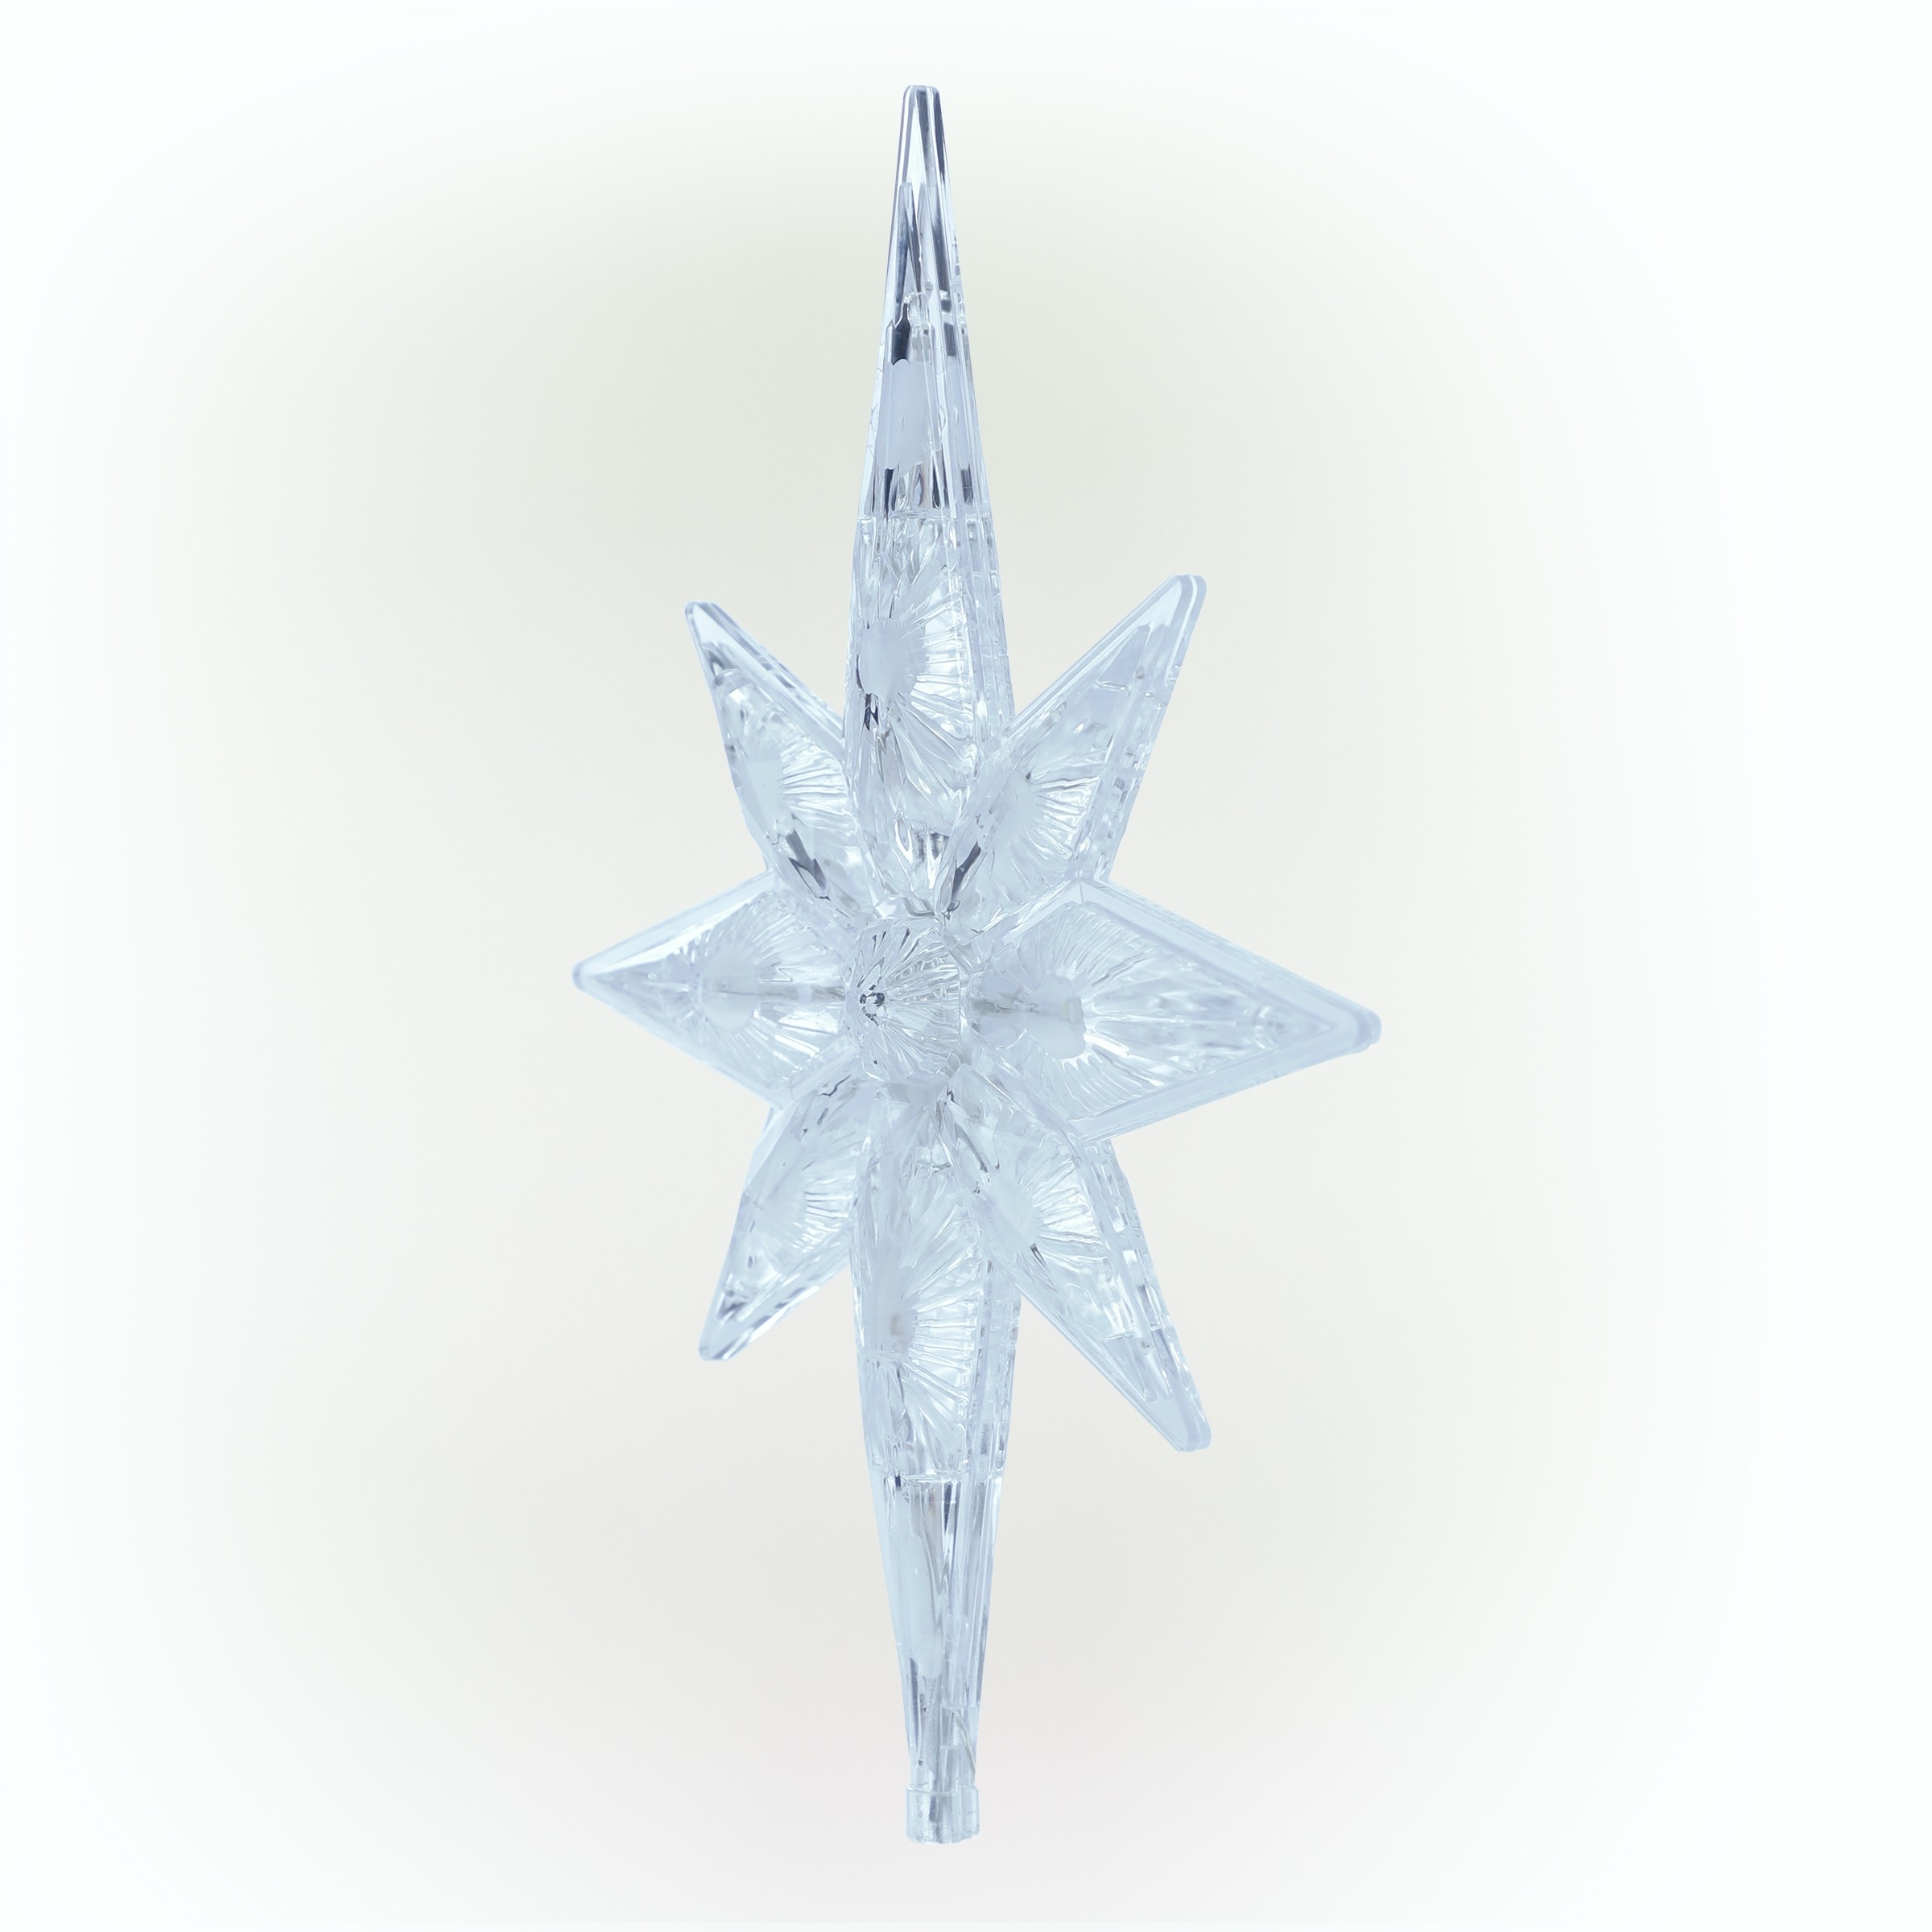 Alpine Corporation Star Christmas Tree Topper with Cool White LED Lights